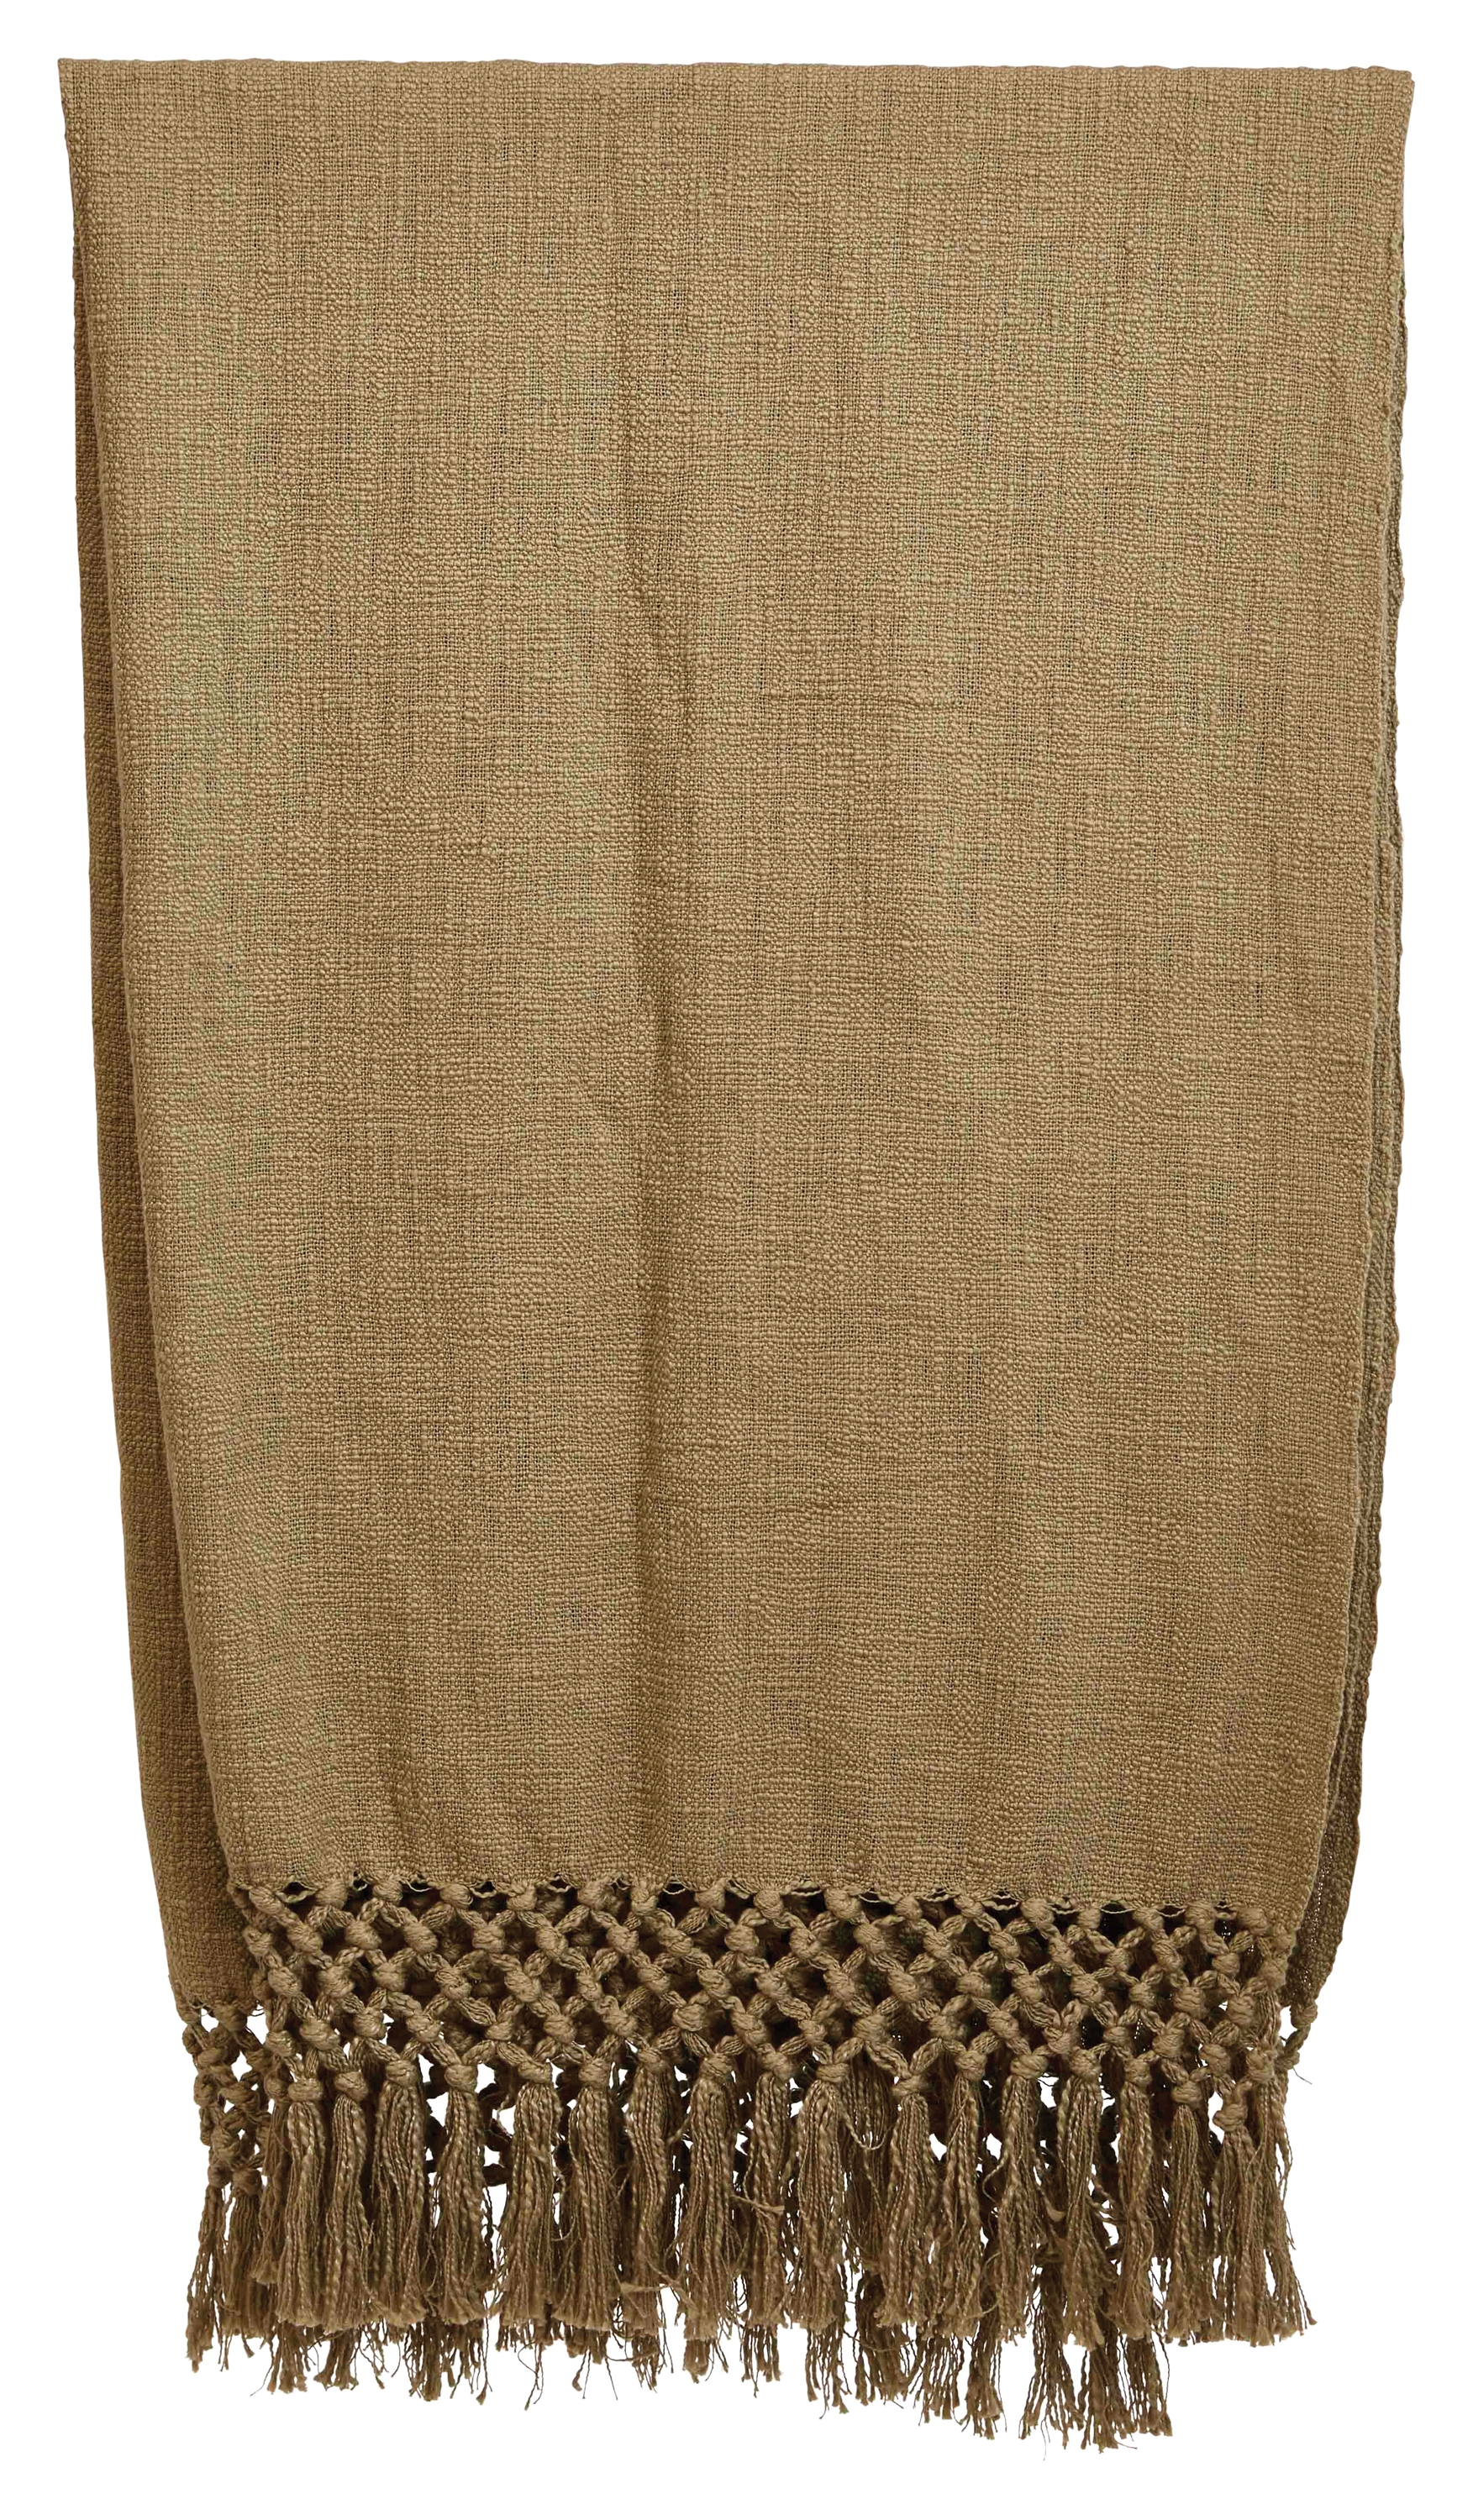 50"L x 60"W Woven Cotton Throw with Crochet & Fringe - Image 0